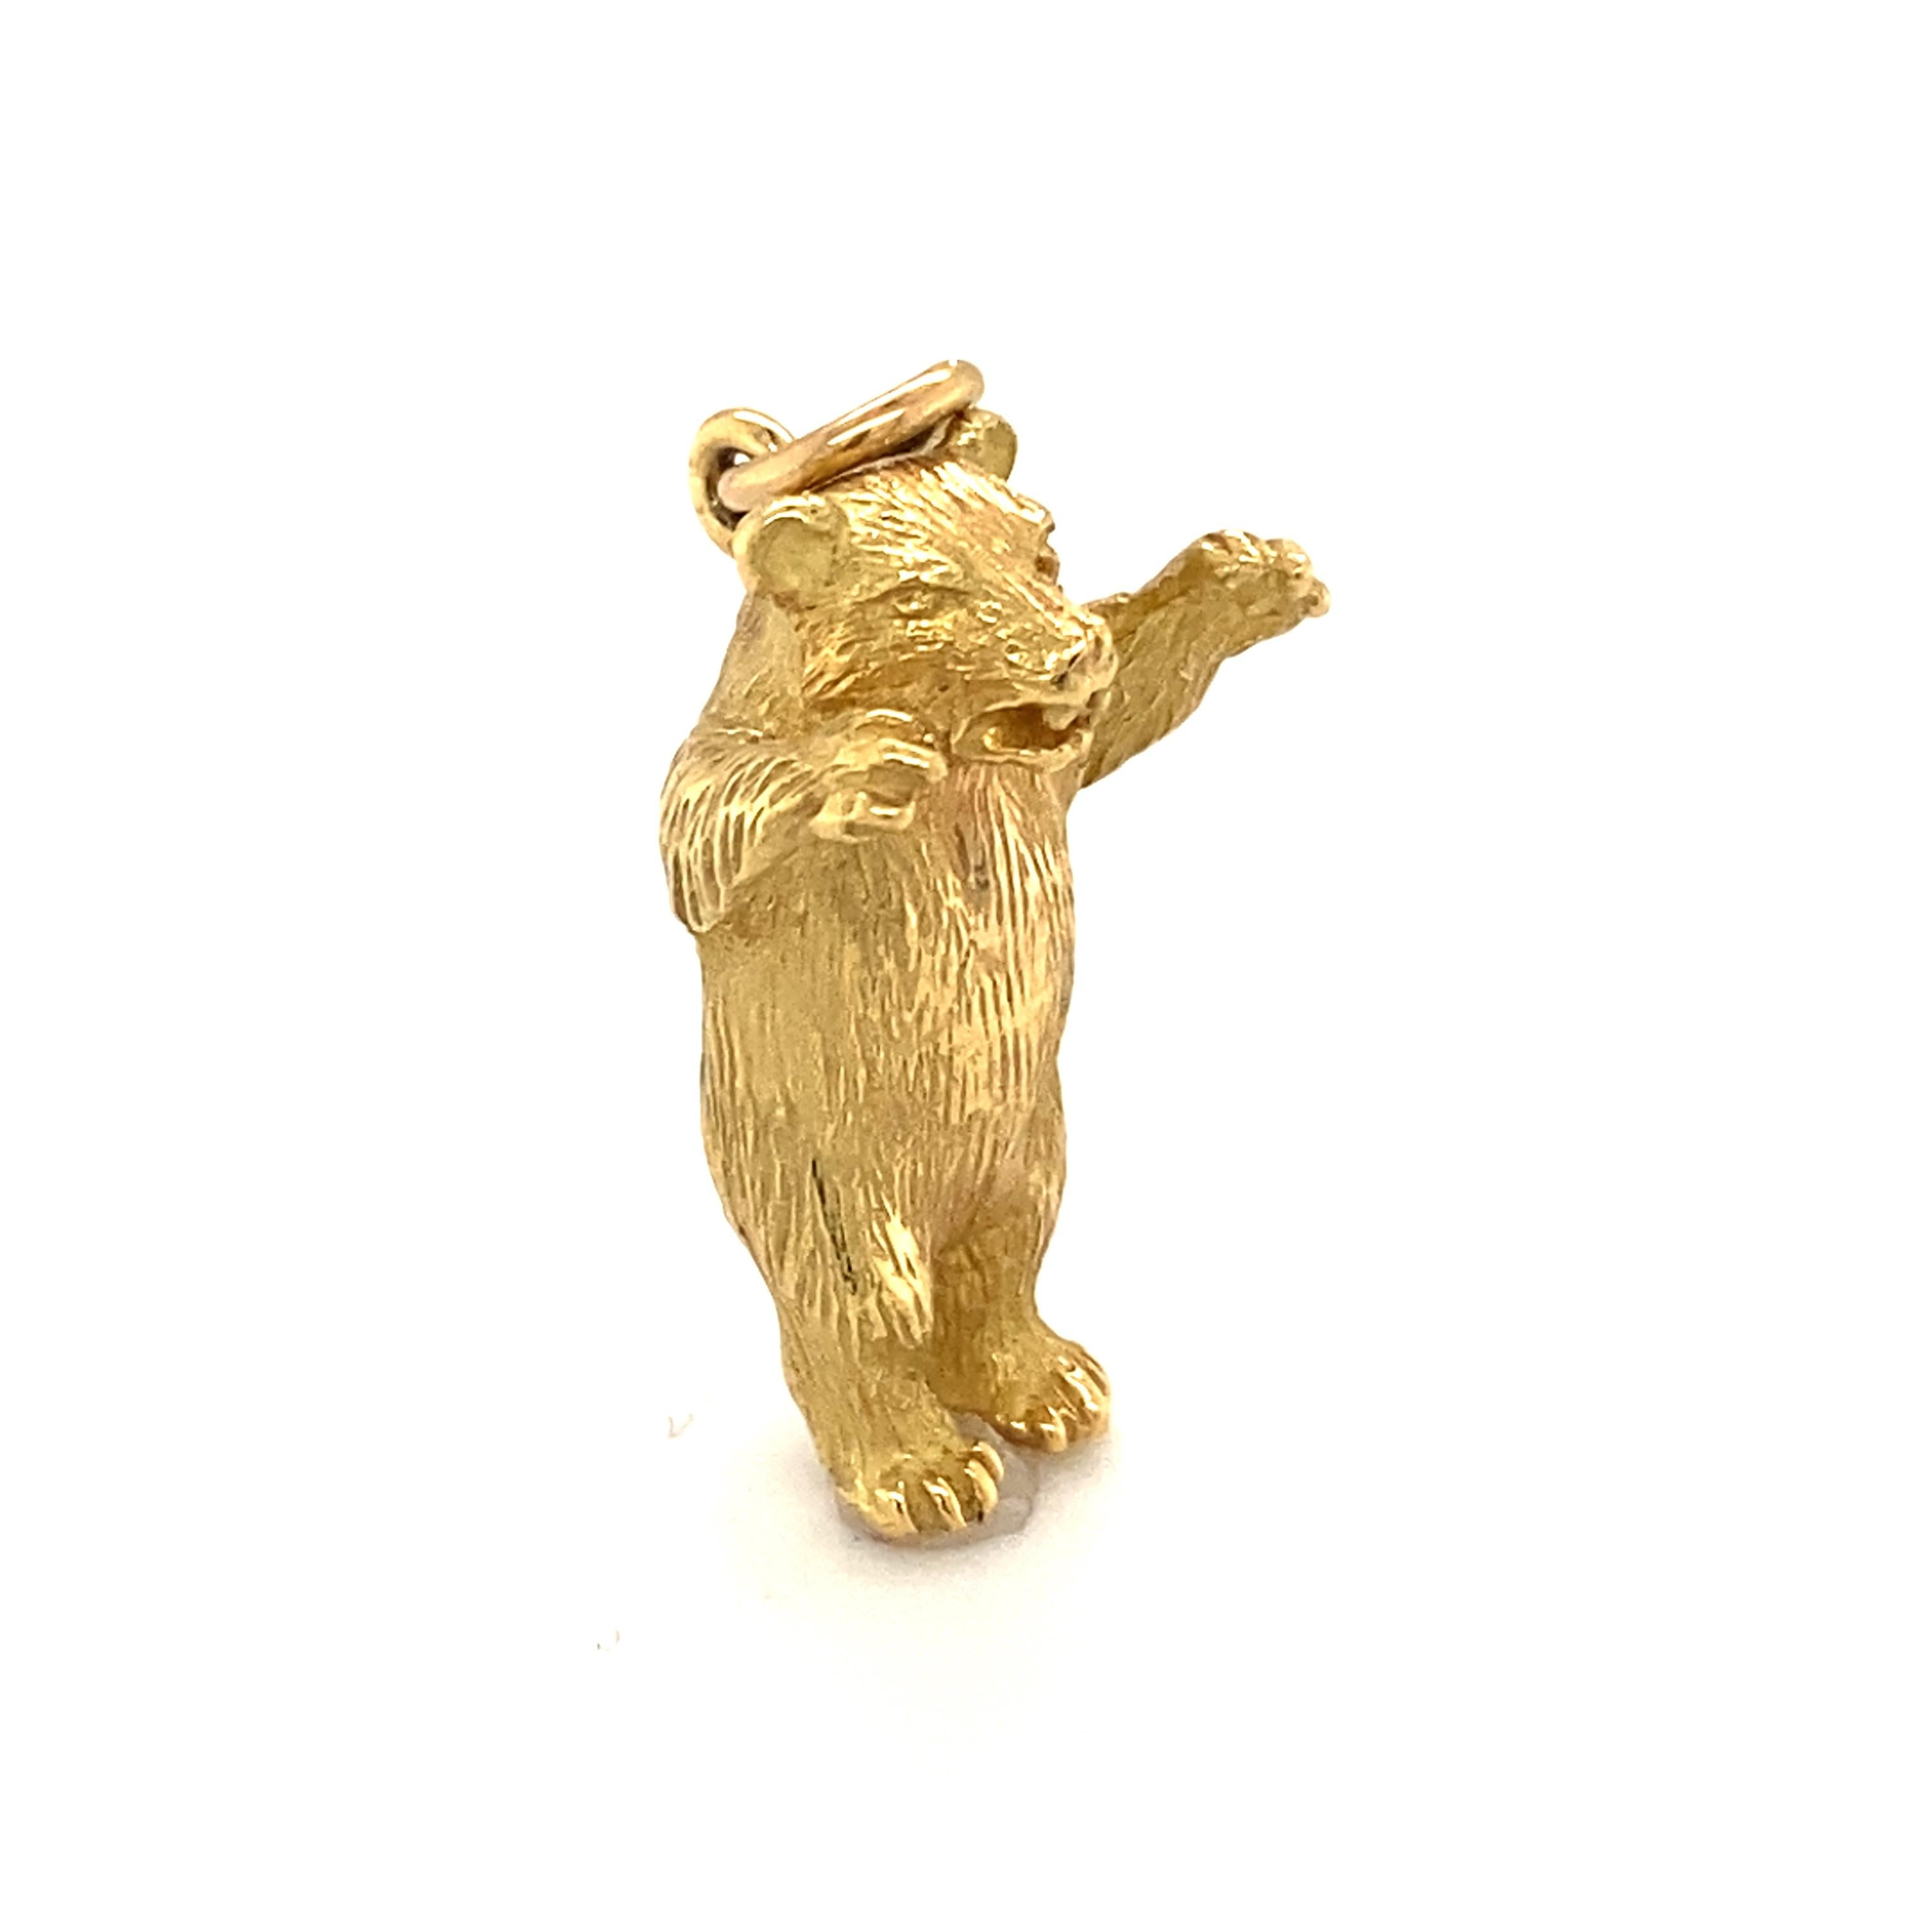 Charm details:
Metal Type: 18 karat yellow gold
Weight: 8.7 grams
Measurement: 1 inch Length x .25 inch Width

1960s Bear charm pendant crafted in 18 karat yellow gold with great detailing in showcasing the life-likeness of the bear. Very well-made!